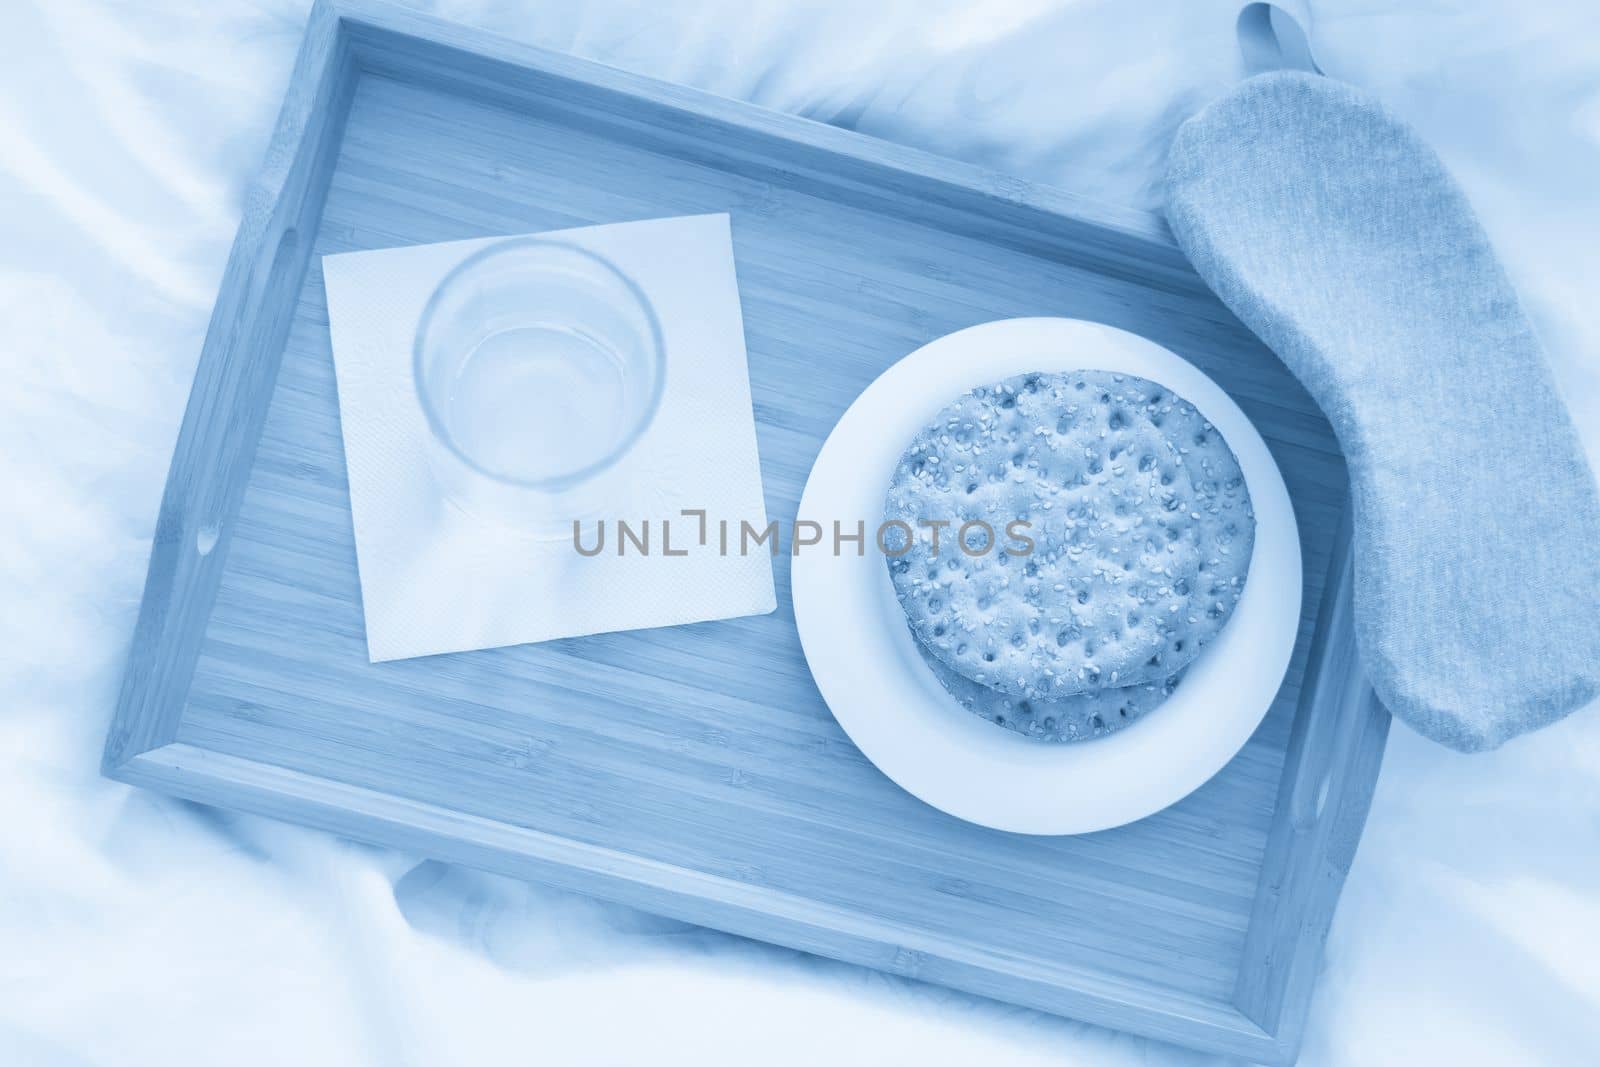 Tray with water and crackers breakfast on a bed